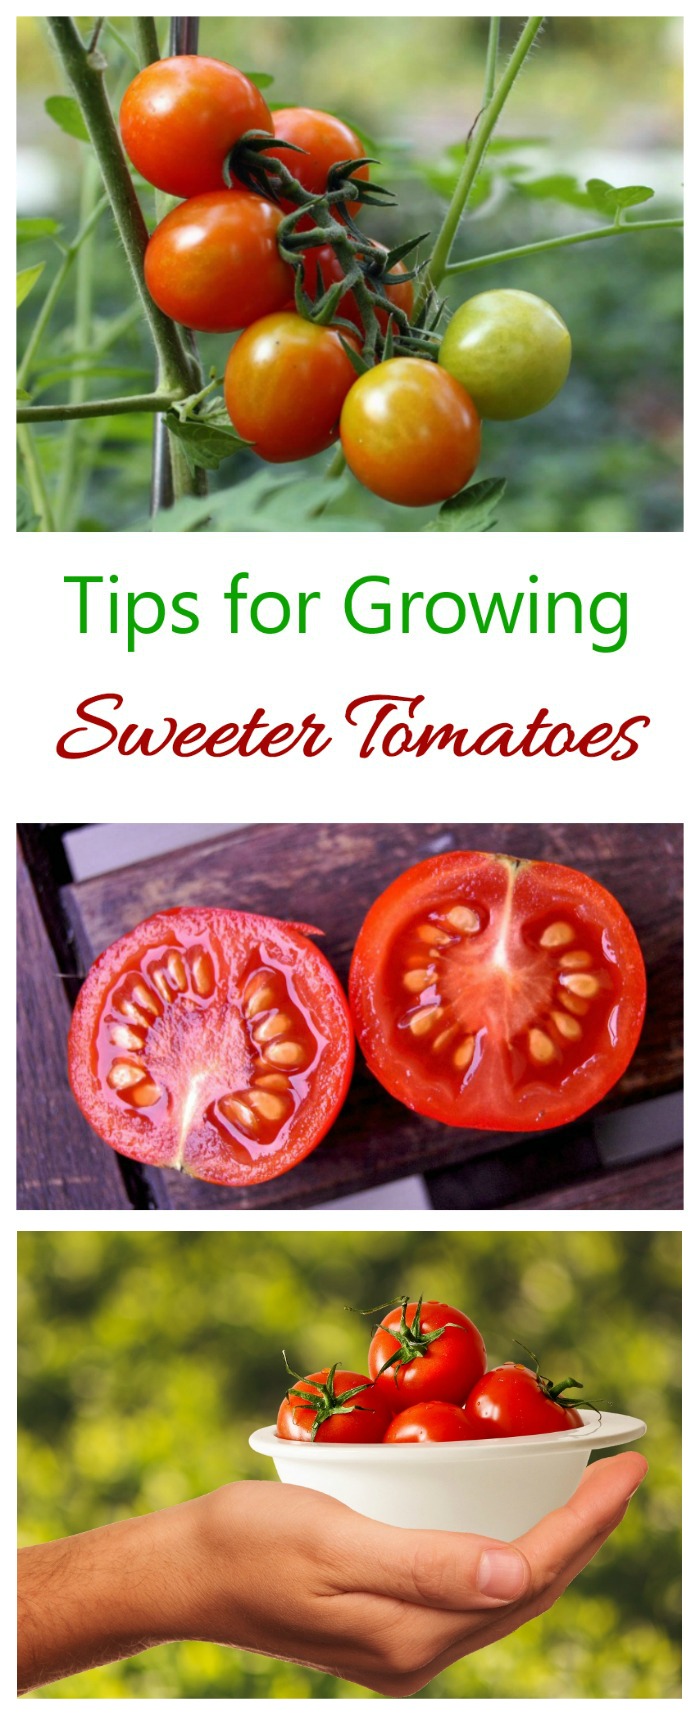 Growing sweet tomatoes depends a lot on the type of tomato and your growing conditions. See my tips and myths about how to get sweeter tomatoes